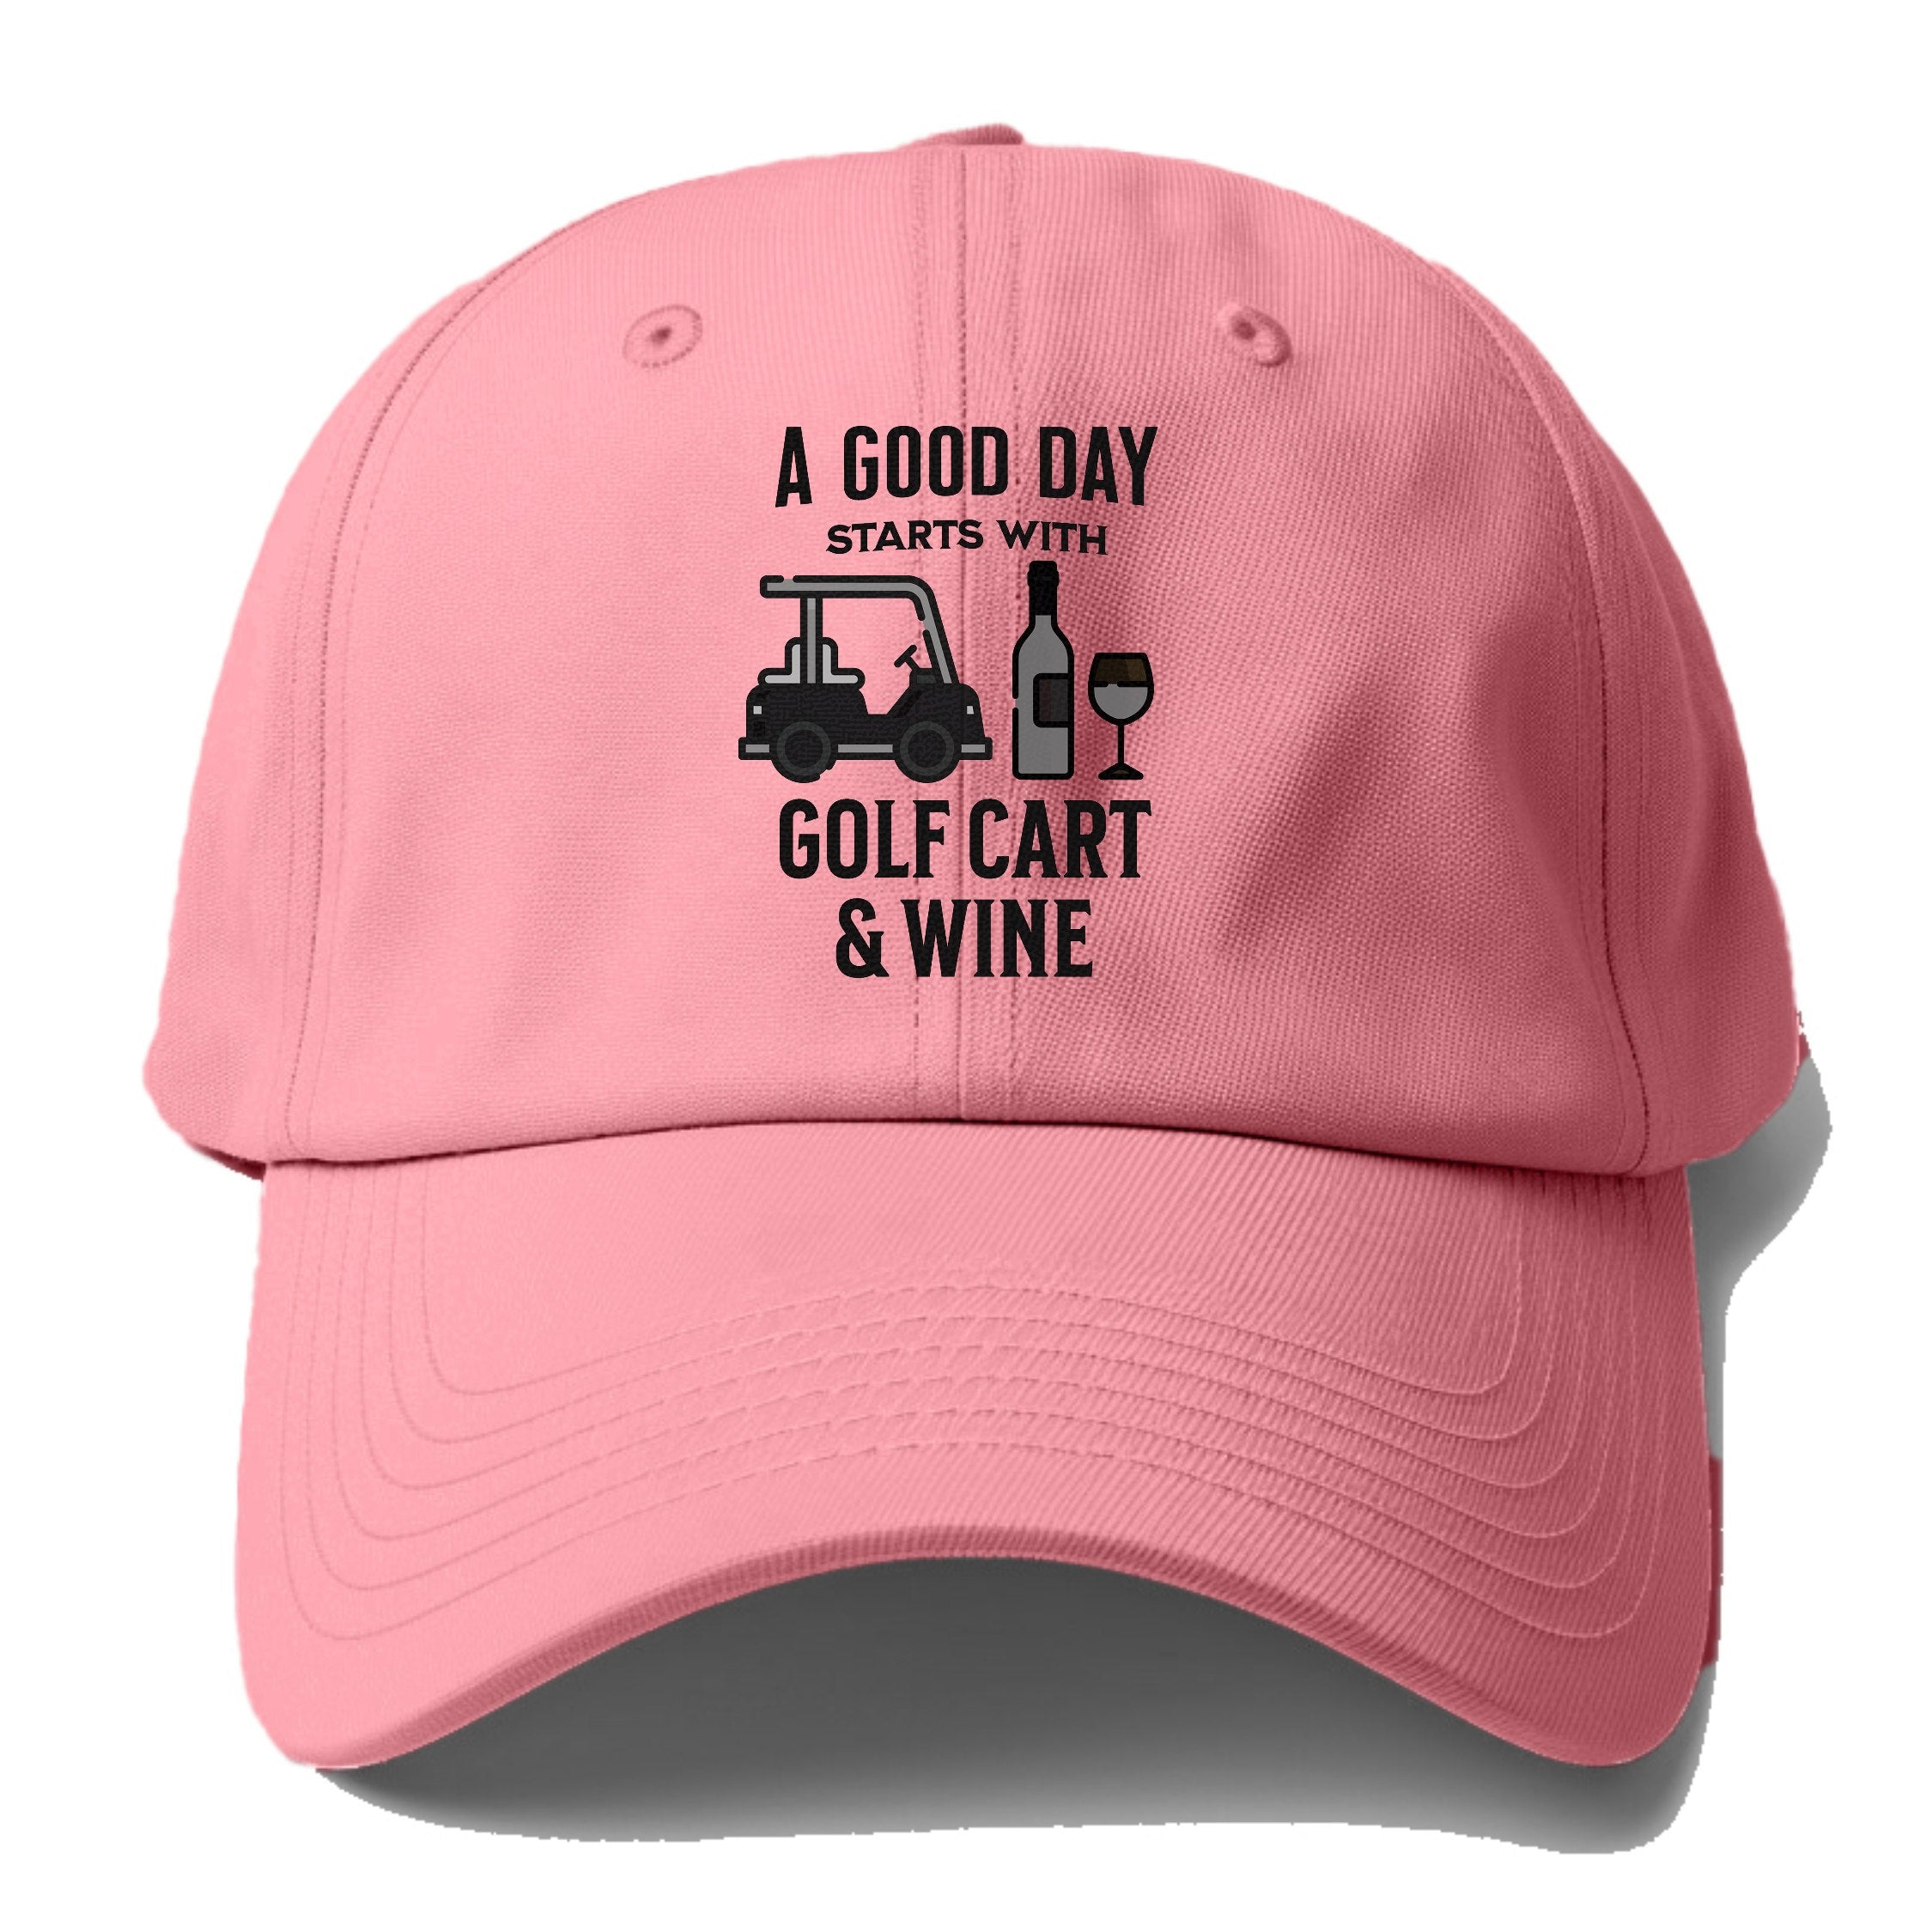 A Good Day Starts With Golf Cart & Wine Baseball Cap For Big Heads